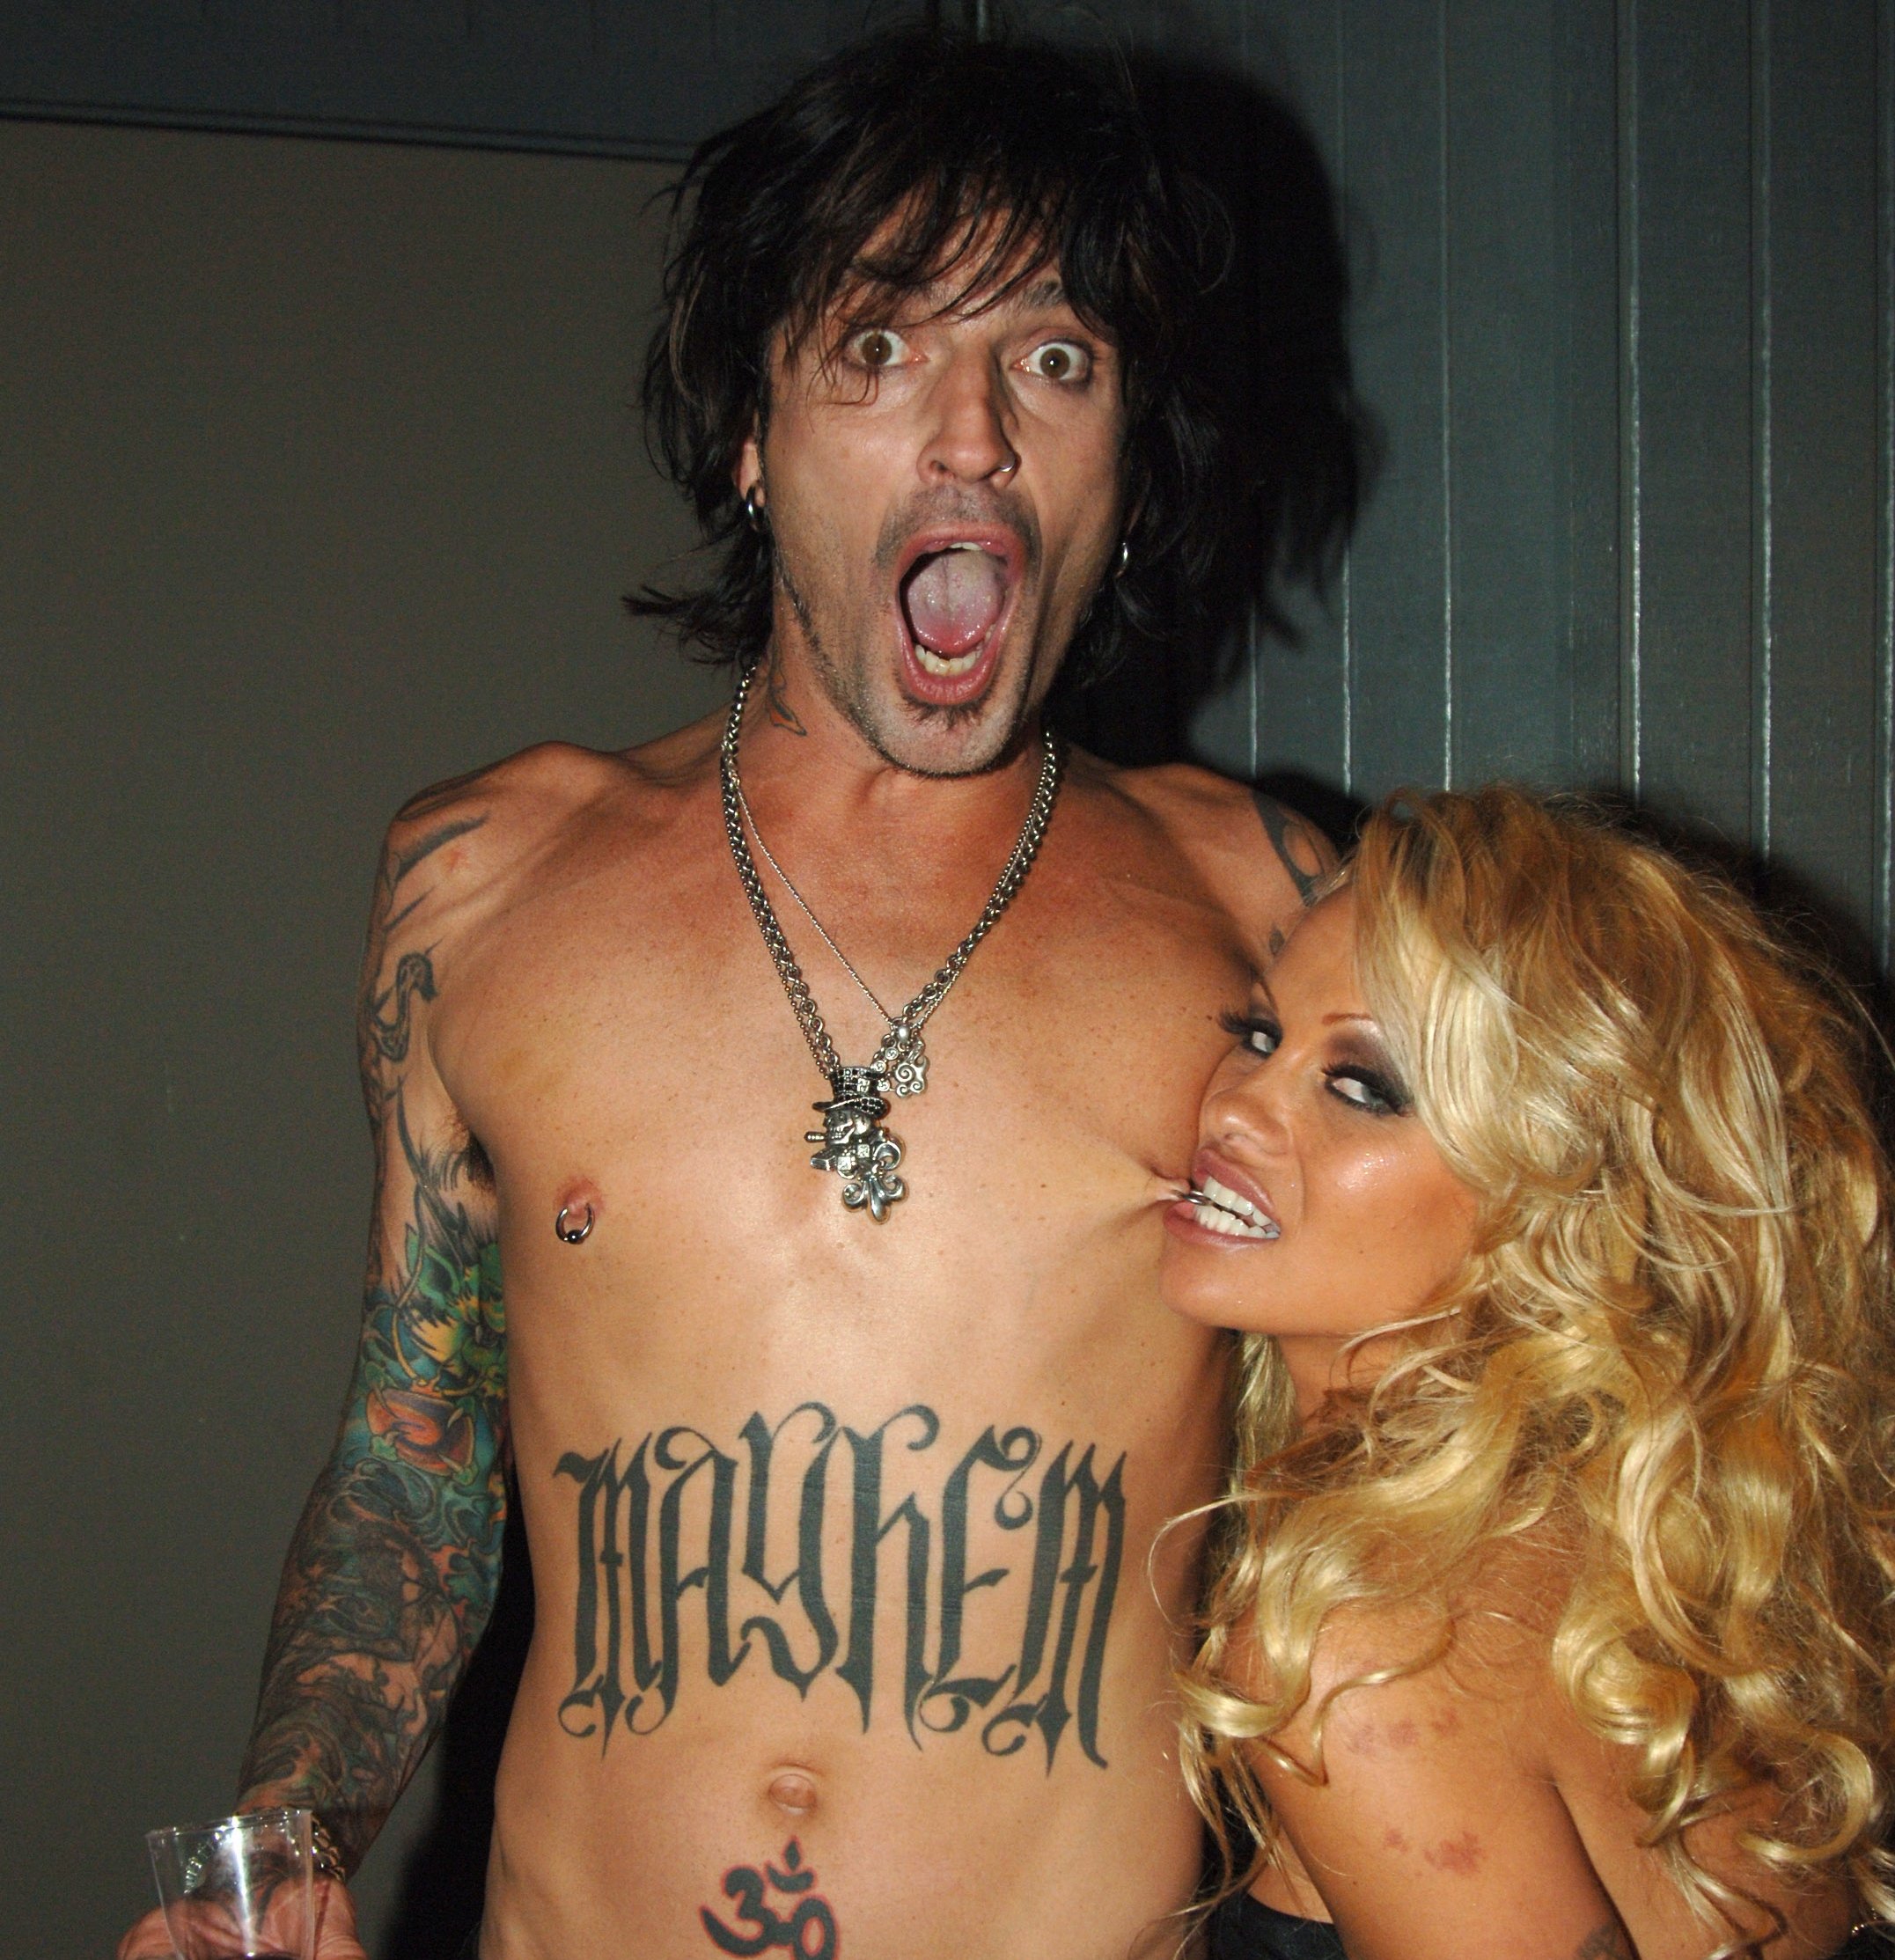 Who Has a Higher Net Worth Today: Pamela Anderson or Tommy Lee?